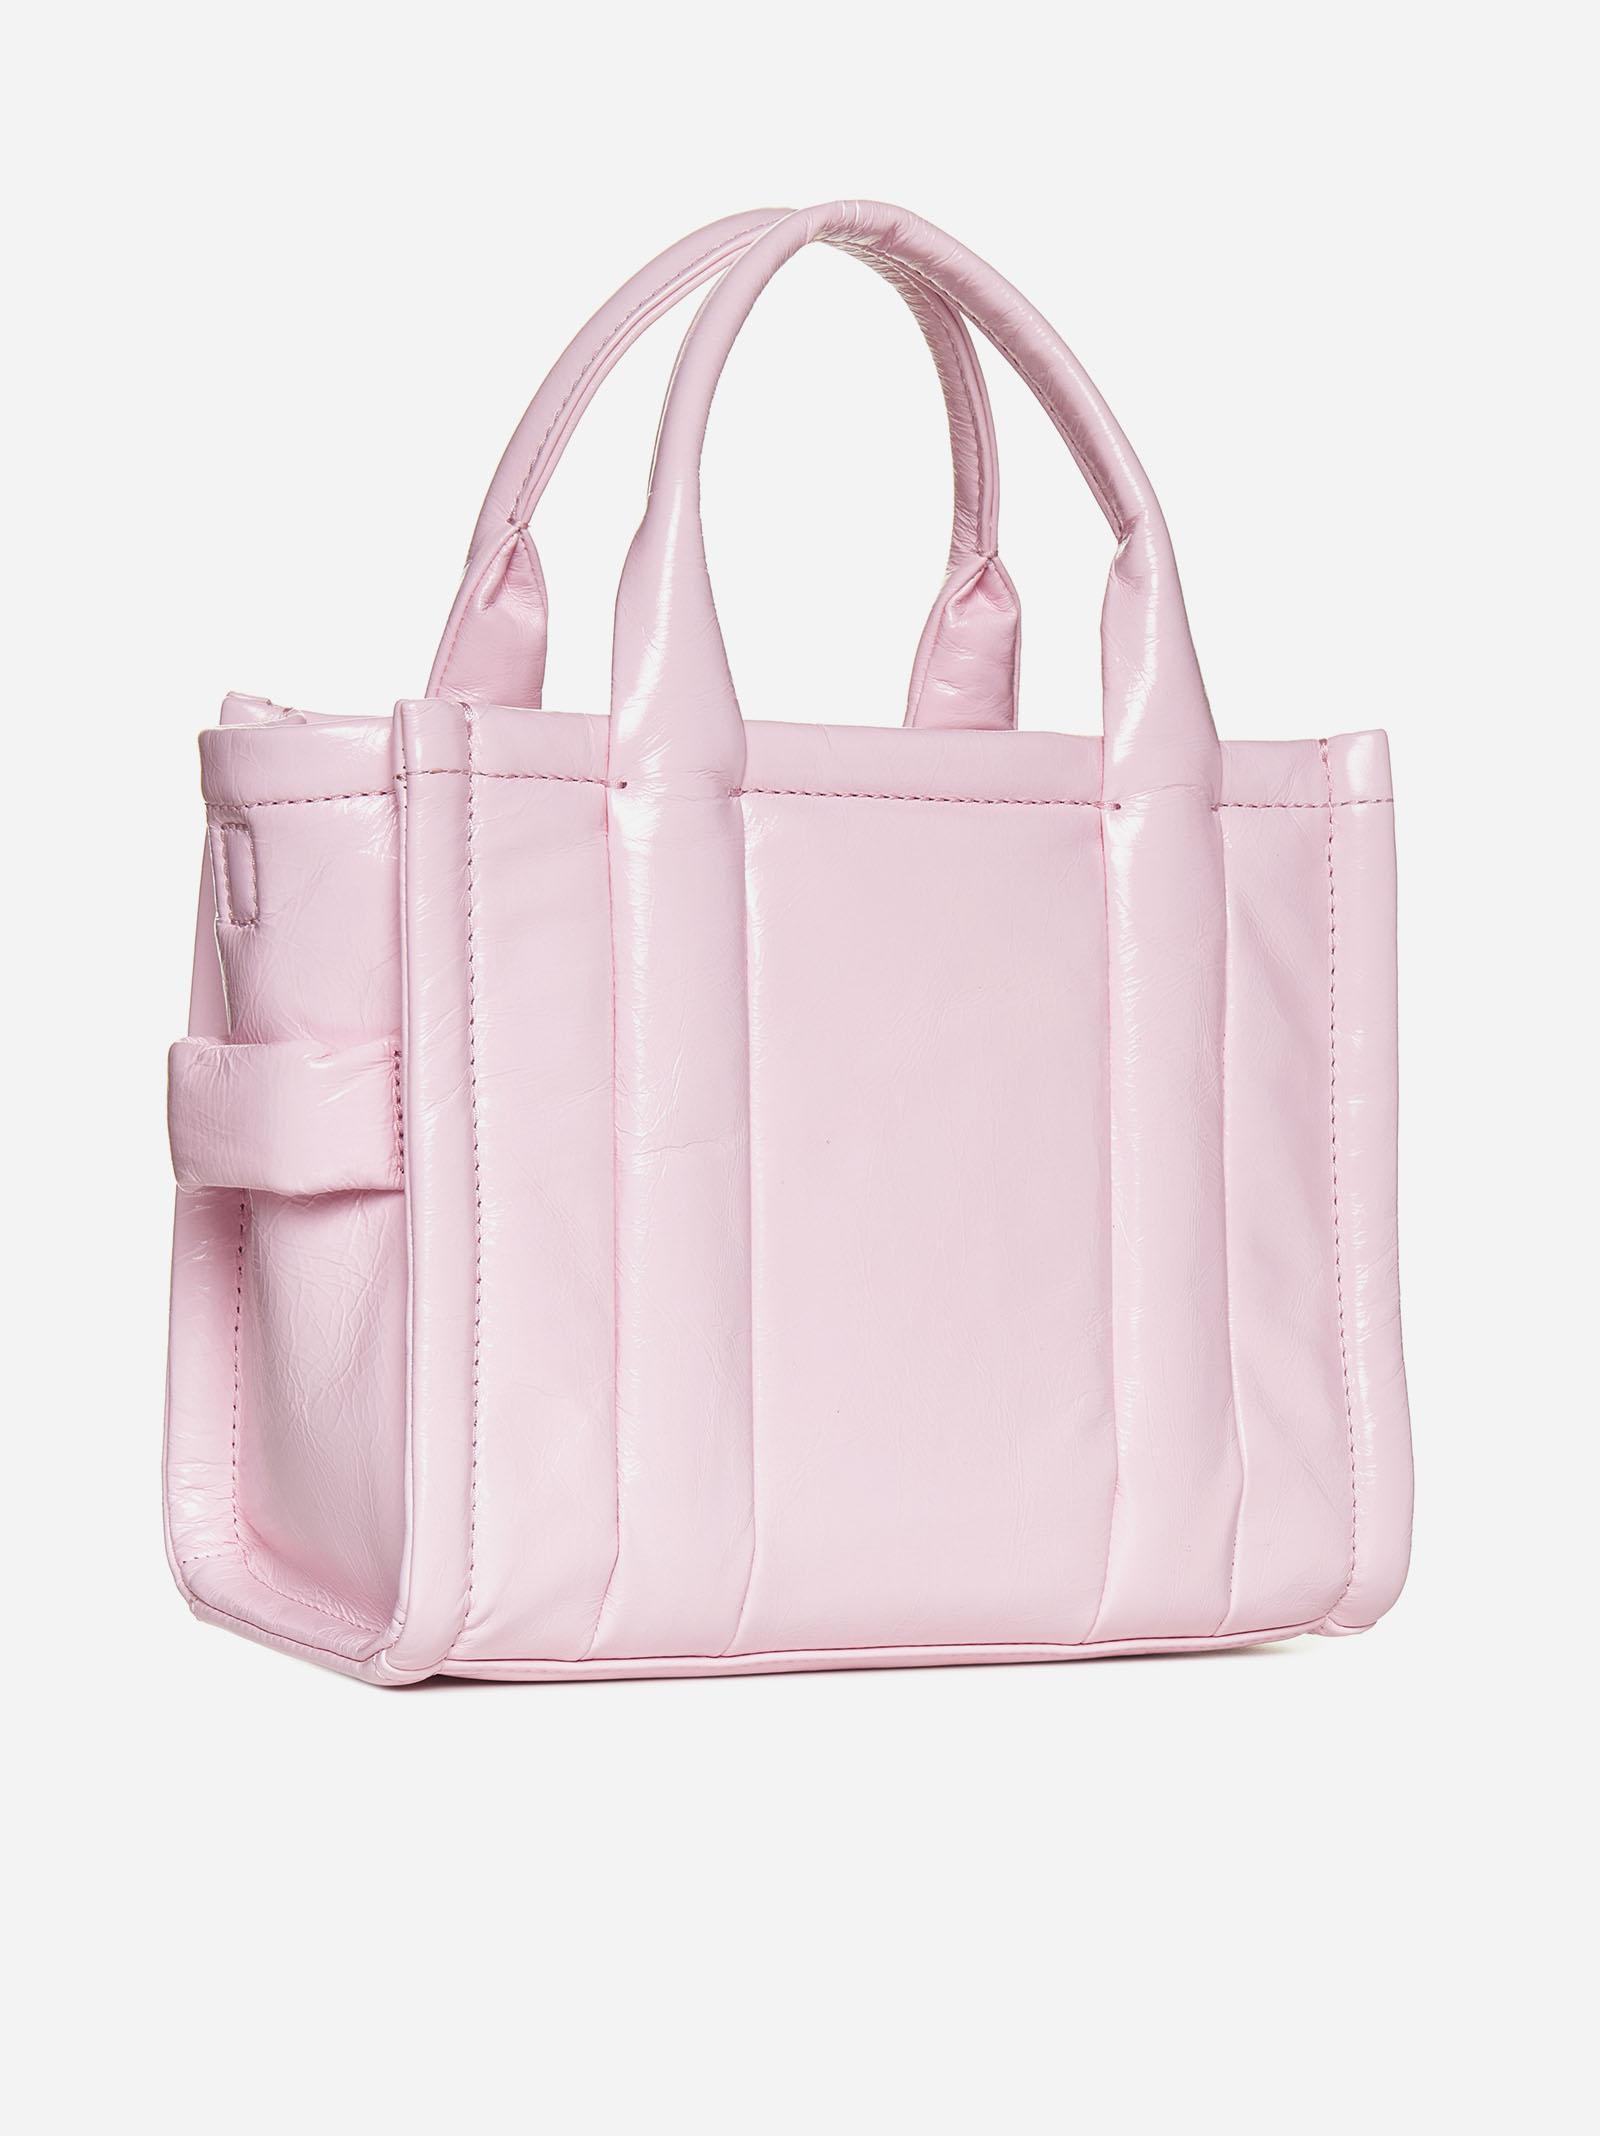 Marc Jacobs, Bags, Brand New Pink Marc Jacobs Tote Bag